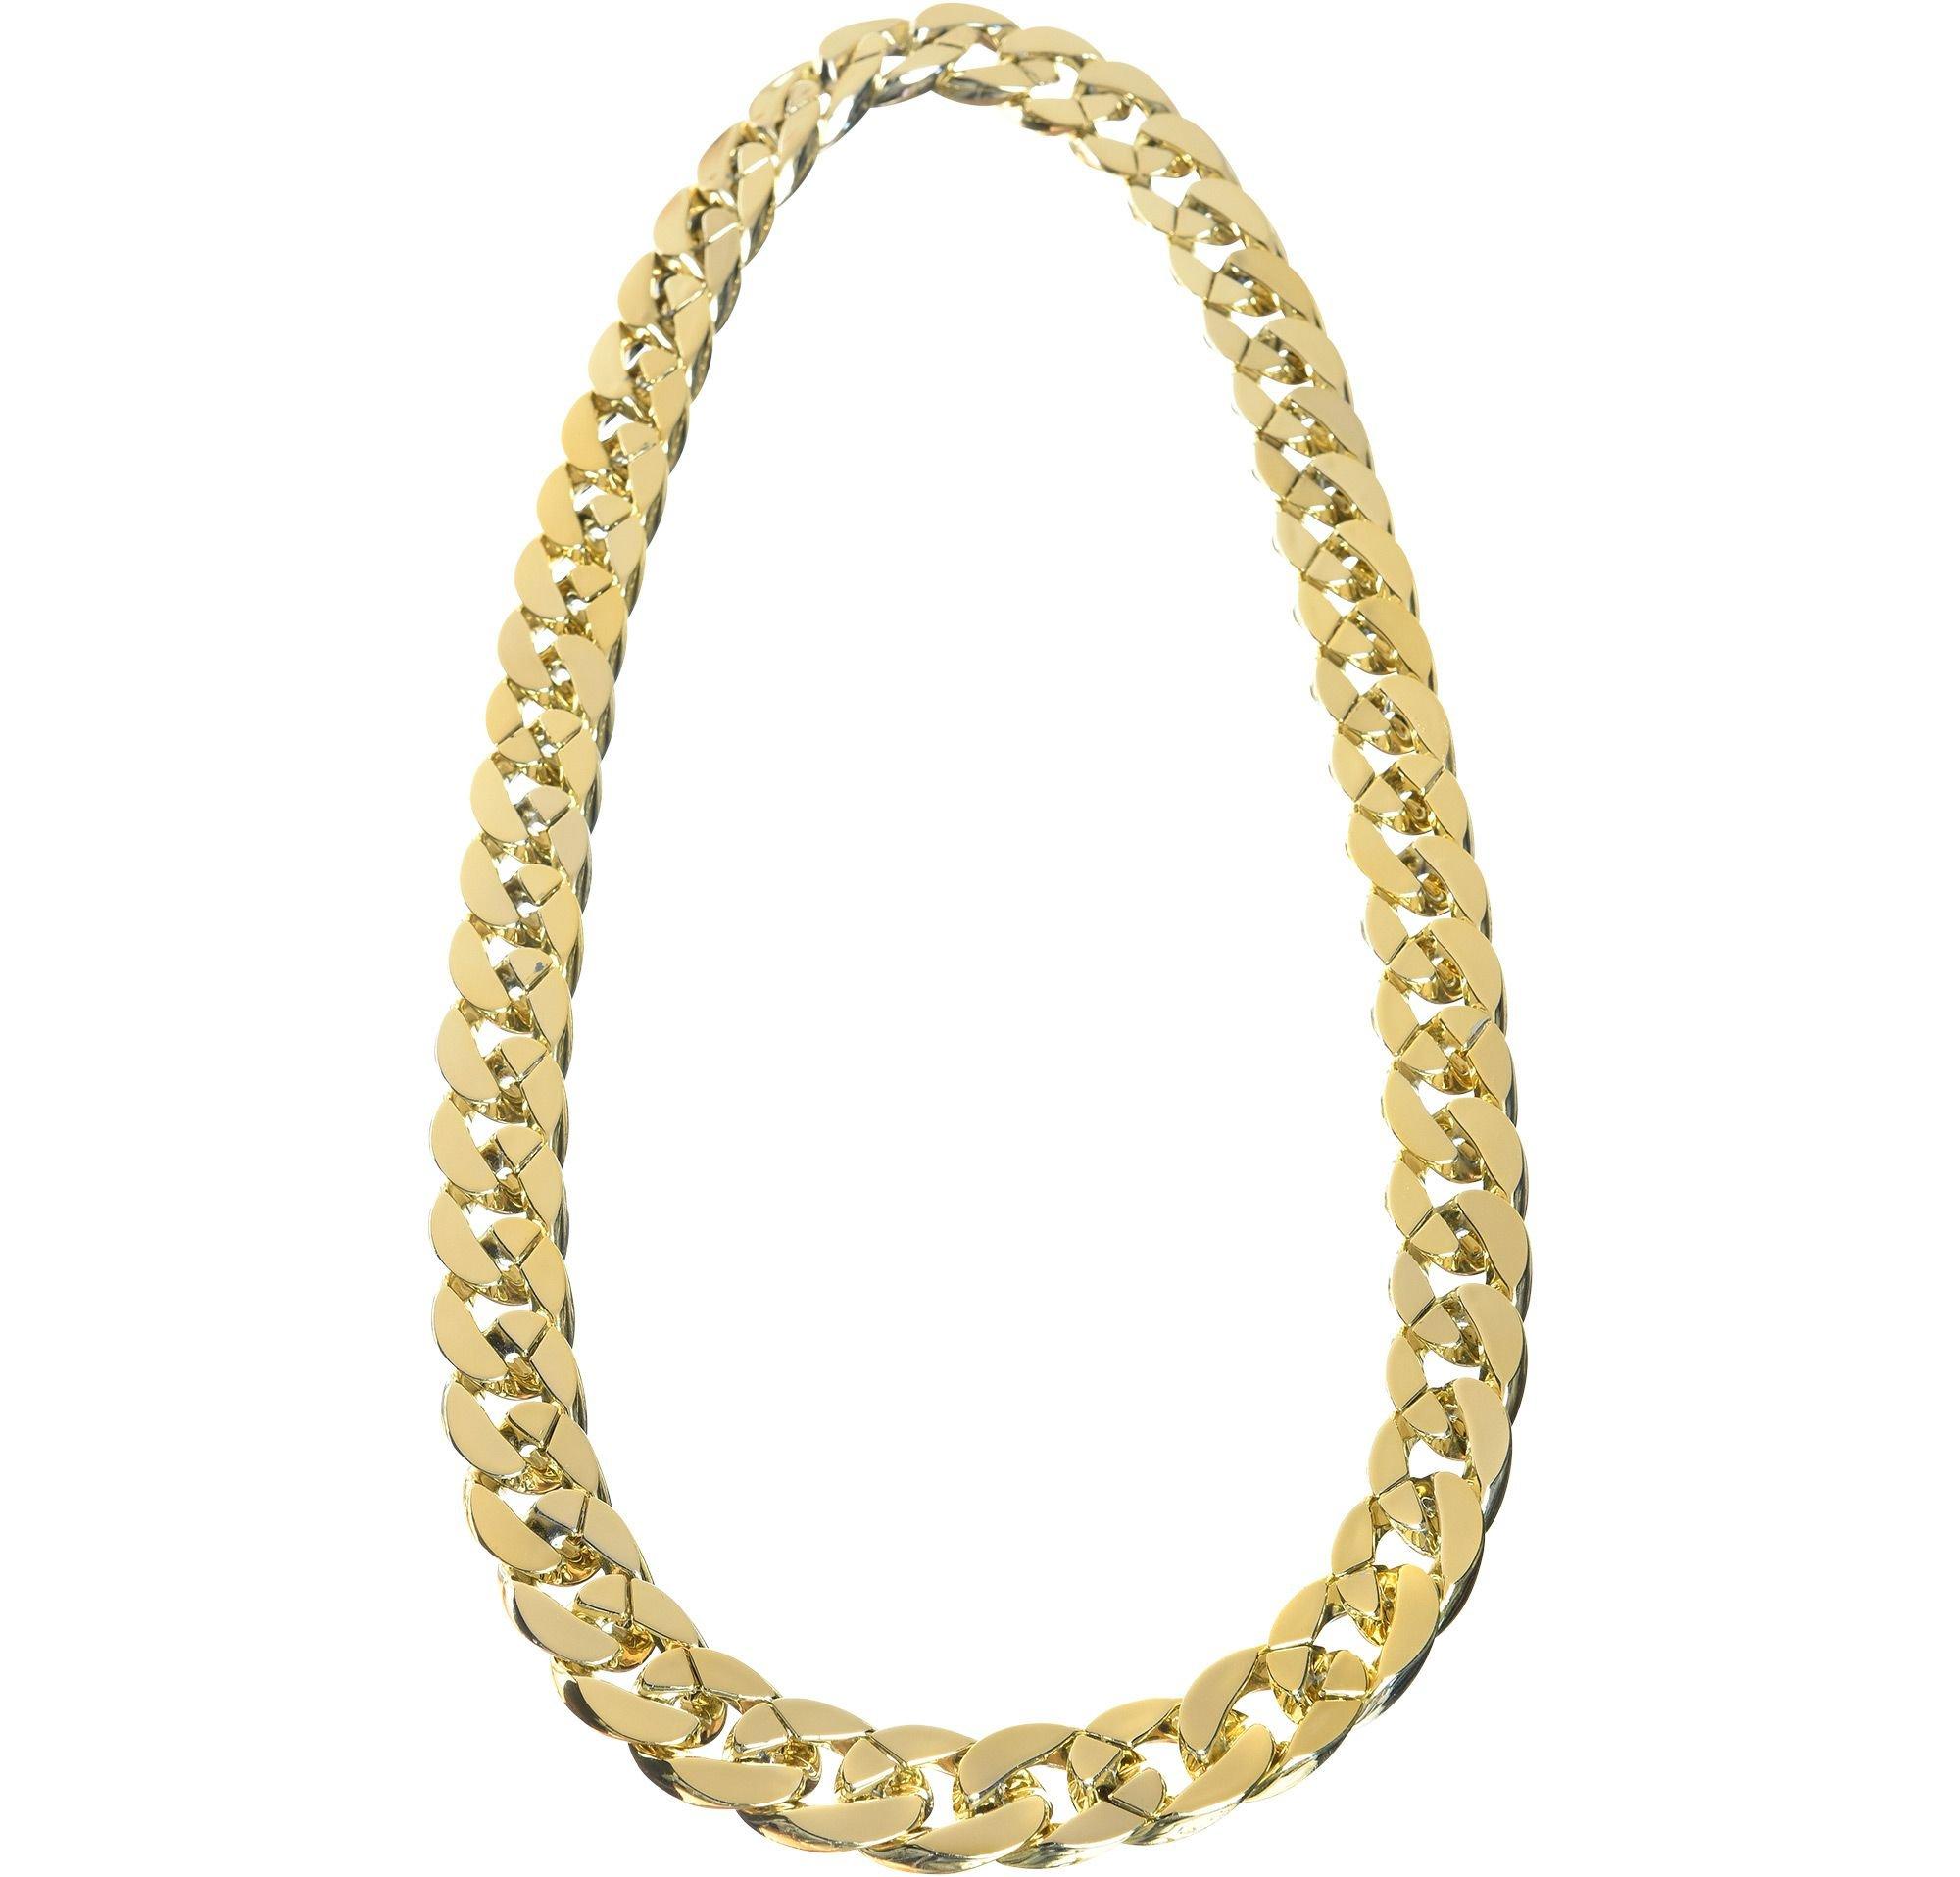 Chunky Gold Chain Necklaces Are a Must-Have for Summer